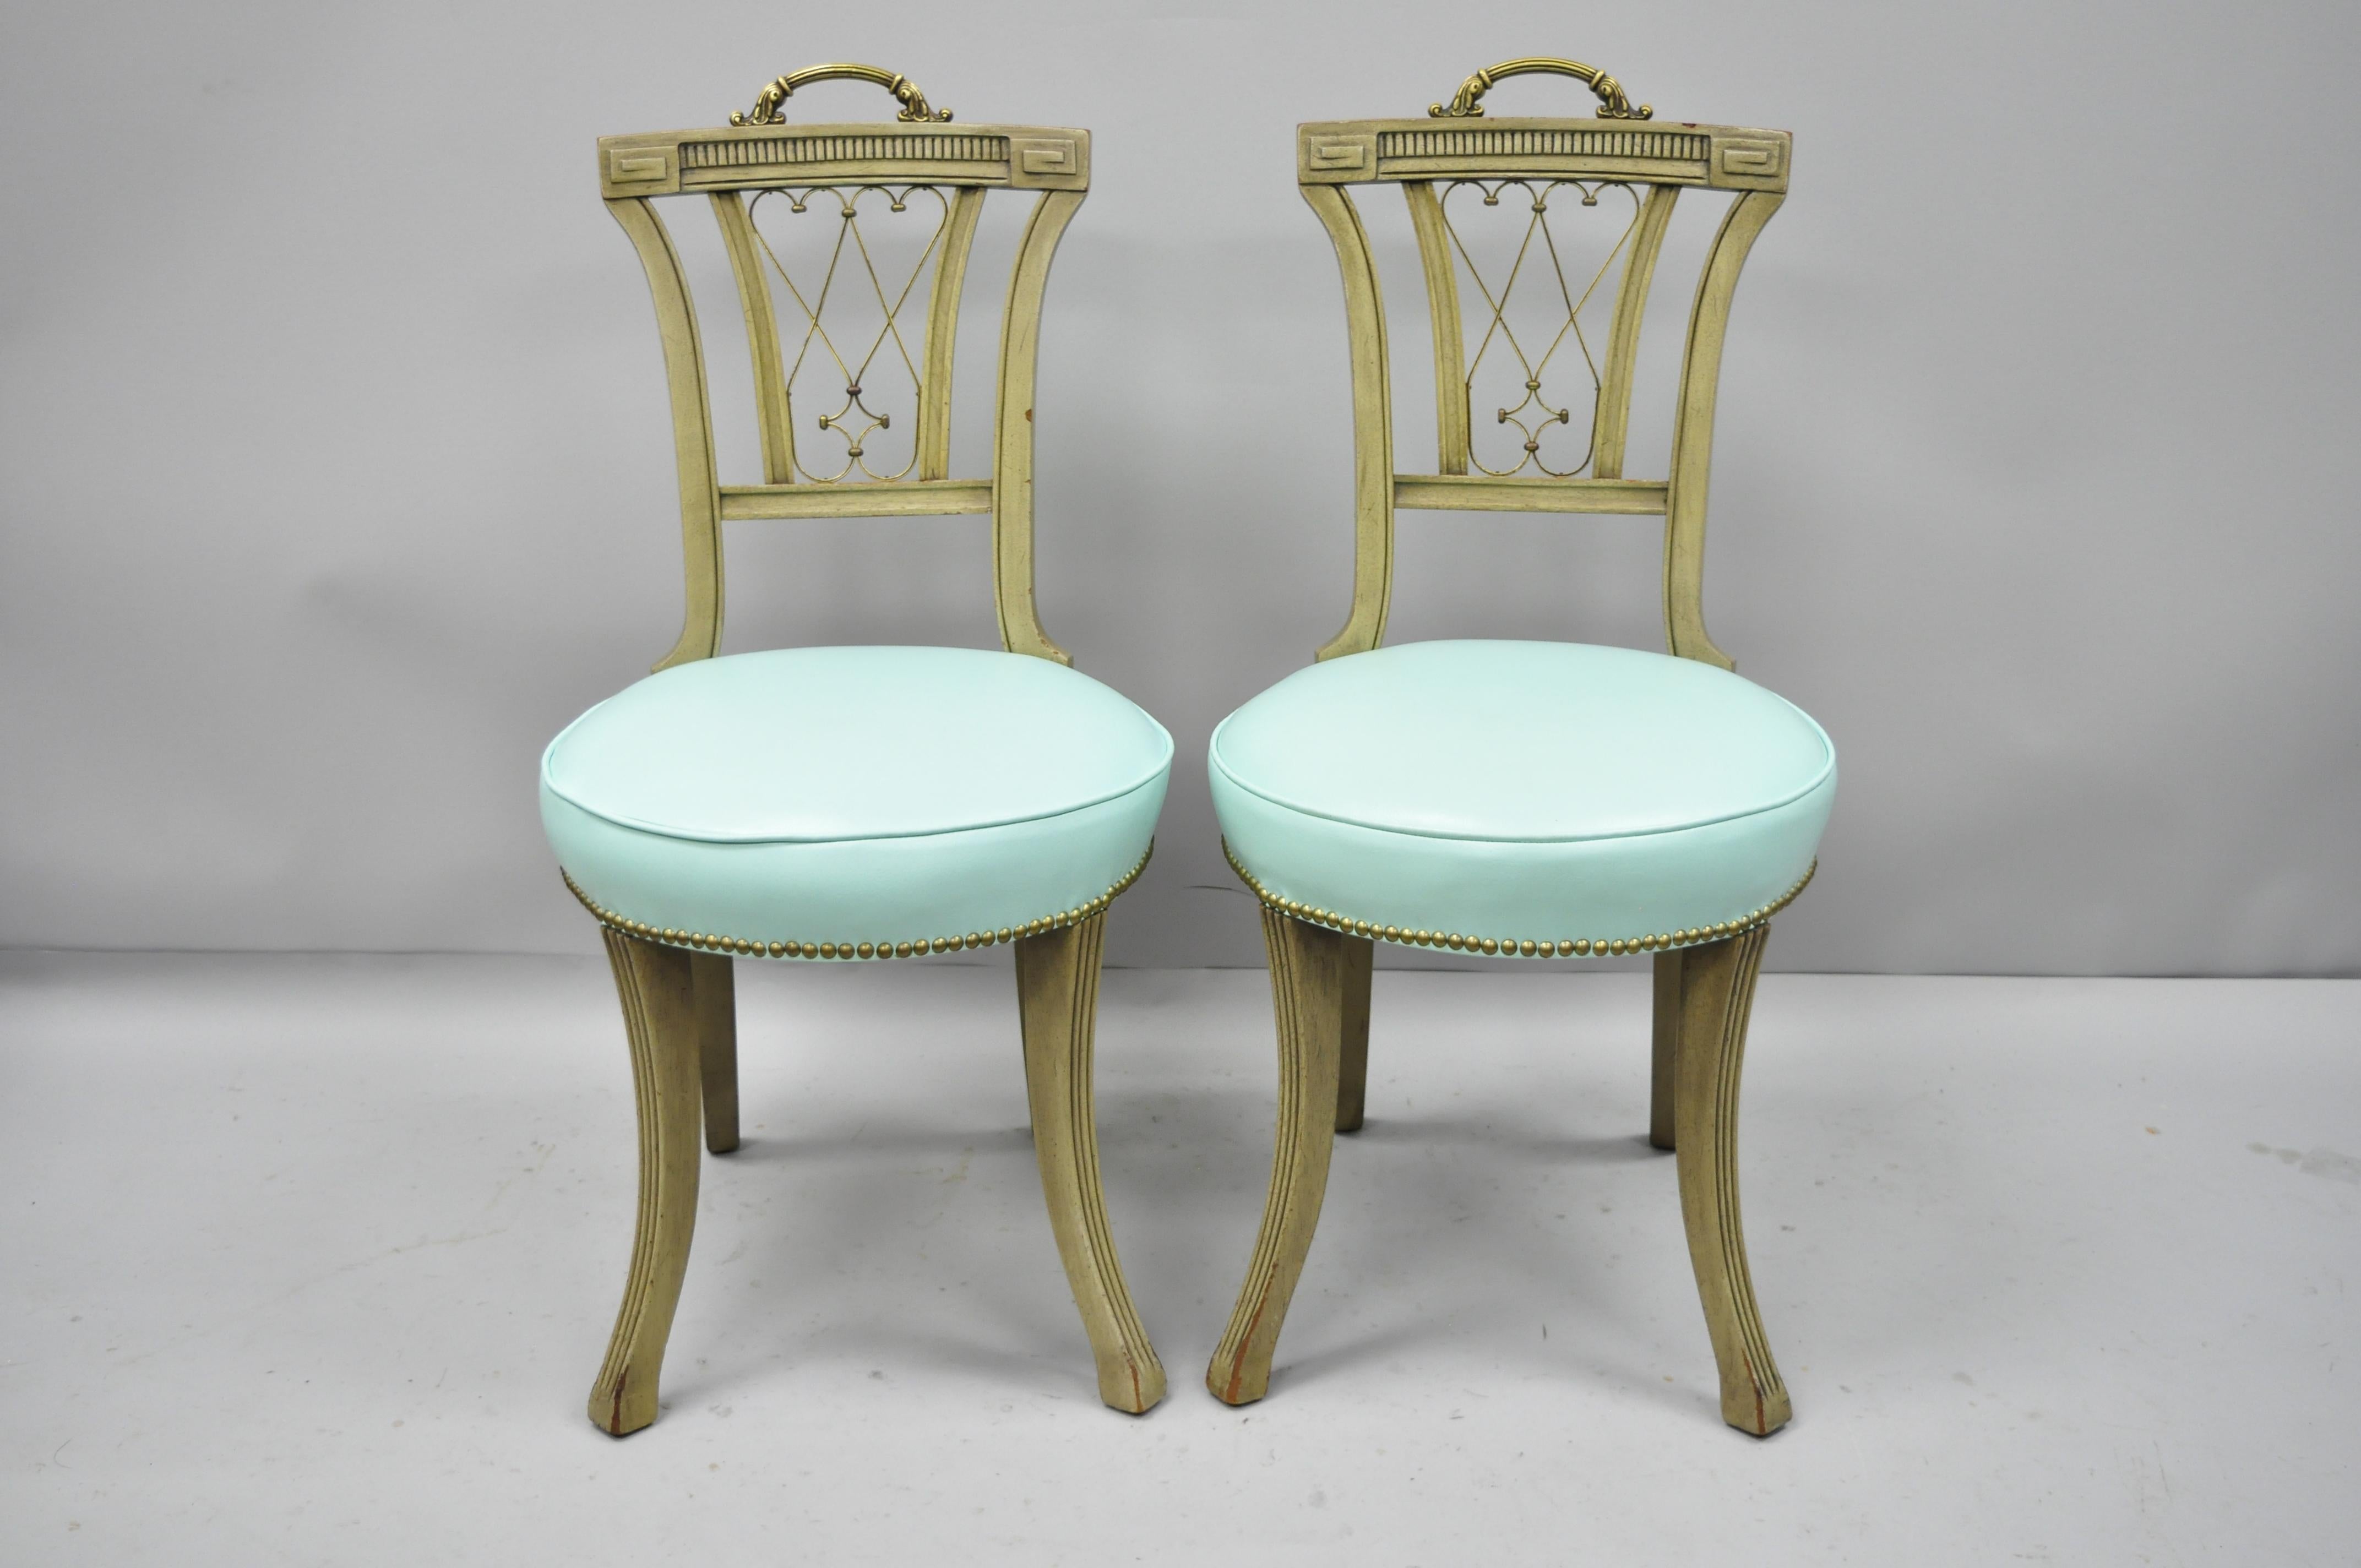 Carved Mahogany French Regency Style Chairs with Brass Handle & Aqua Vinyl, Pair For Sale 4